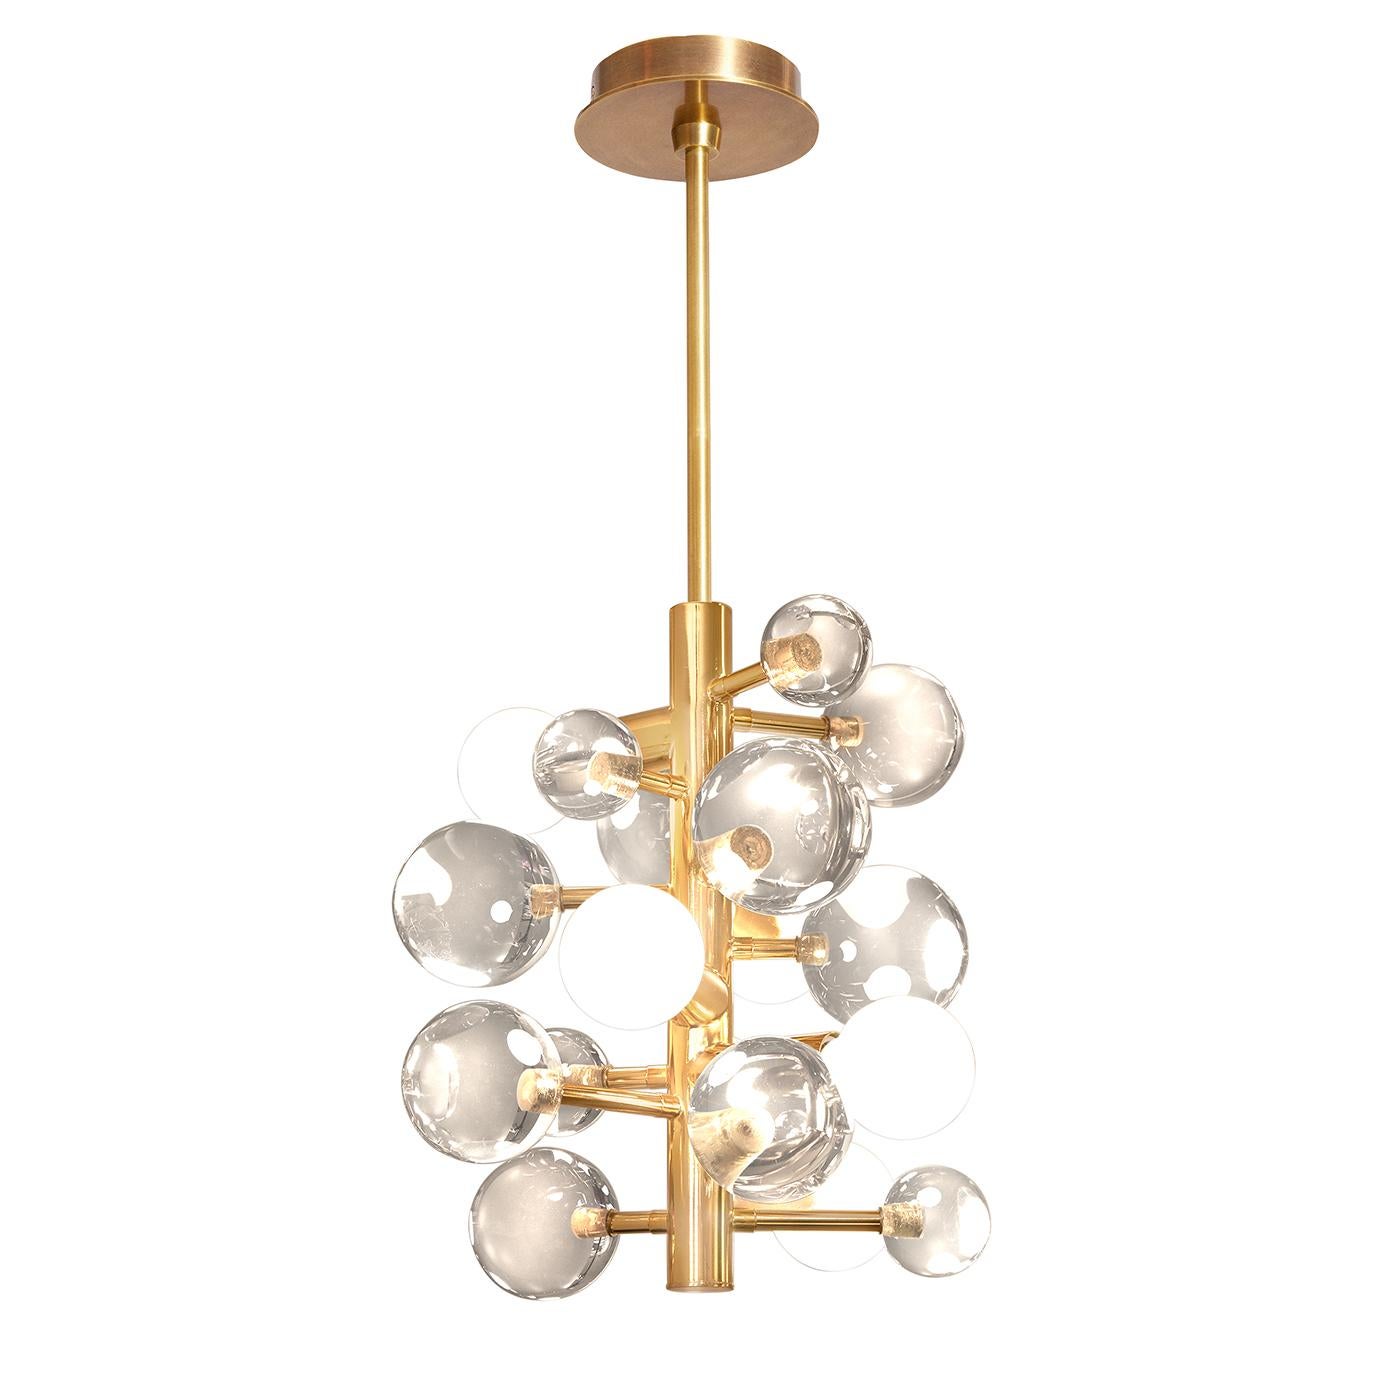 Lustrous sculpture. A constellation of Lucite spheres floats on a brass stem with five interspersed globe bulbs to create a glamorous rhythm of light. Diminutive in scale but big in style, think of our Globo five-light chandelier as jewelry for your